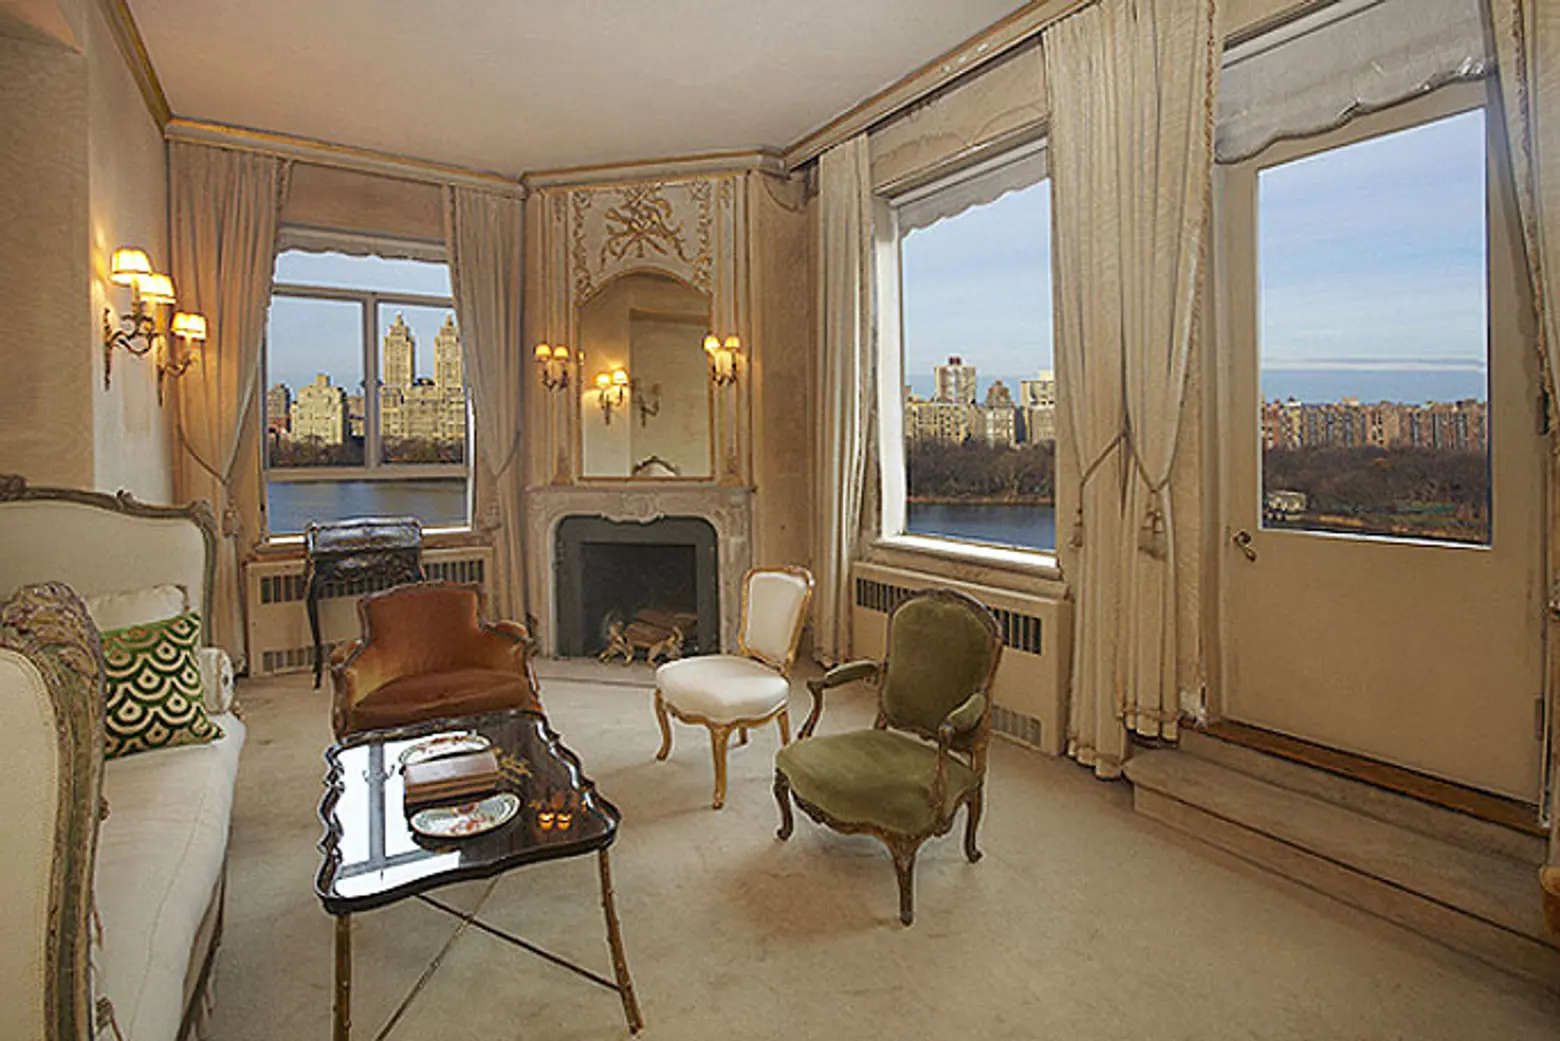  inside nyc penthouses, new york's first penthouse, manhattan's first penthouse, burden mansion nyc, burden mansion 1929, George Fuller Construction Company, 1107 Fifth Avenue , Marjorie Merriweather Post Hutton, Post Cereals, new york penthouse, famous penthouses, historic nyc penthouses